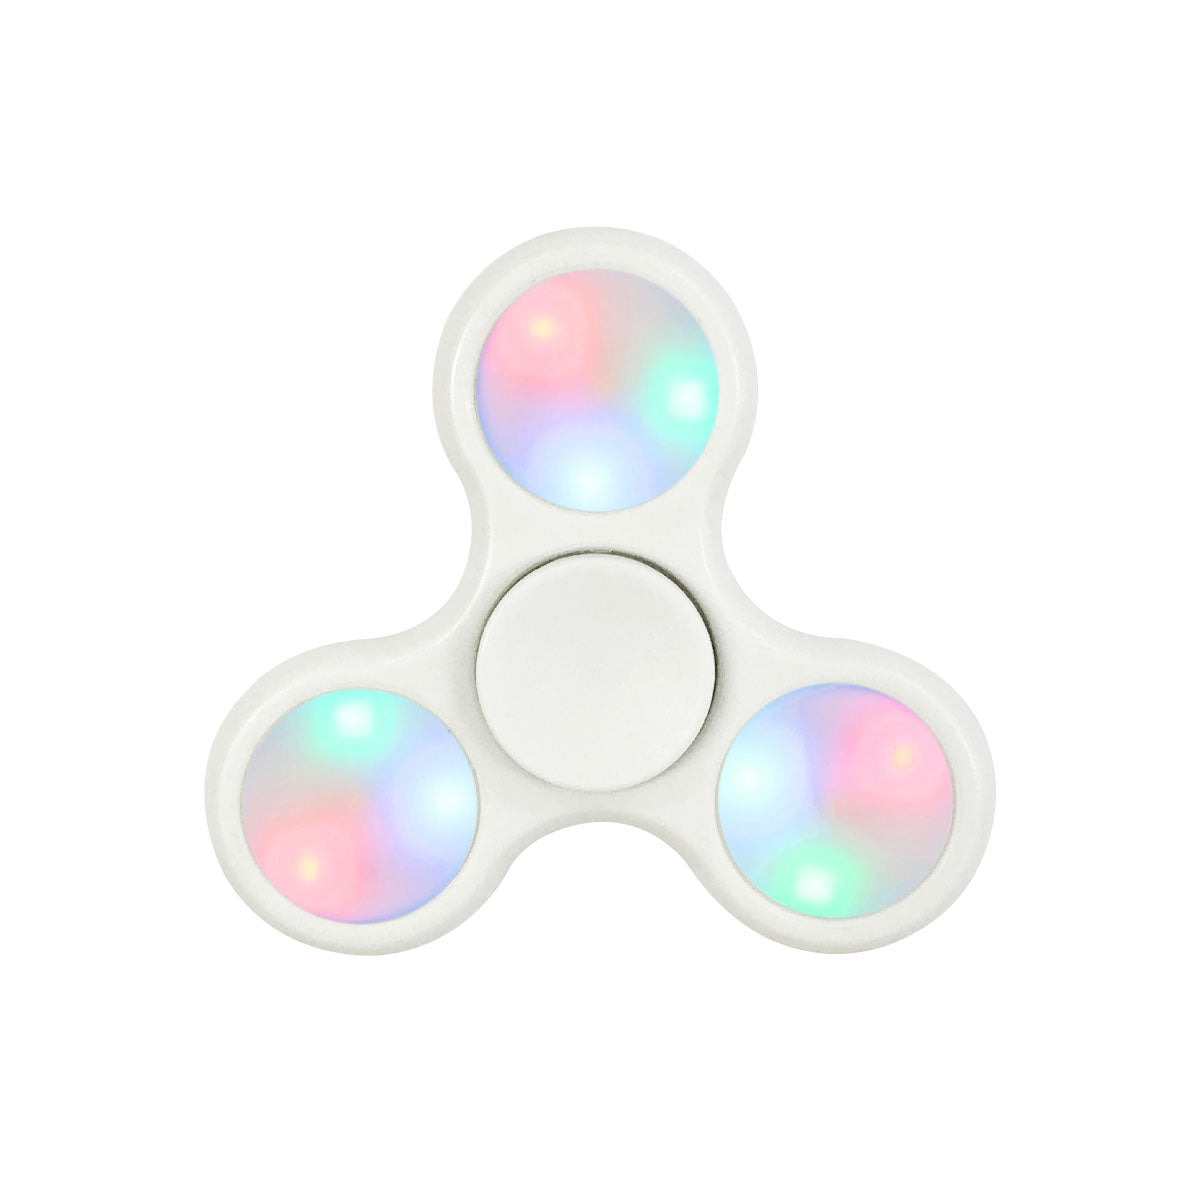 Wrapables LED Fidget Spinner Toy to Relieve Anxiety Stress and Boredom